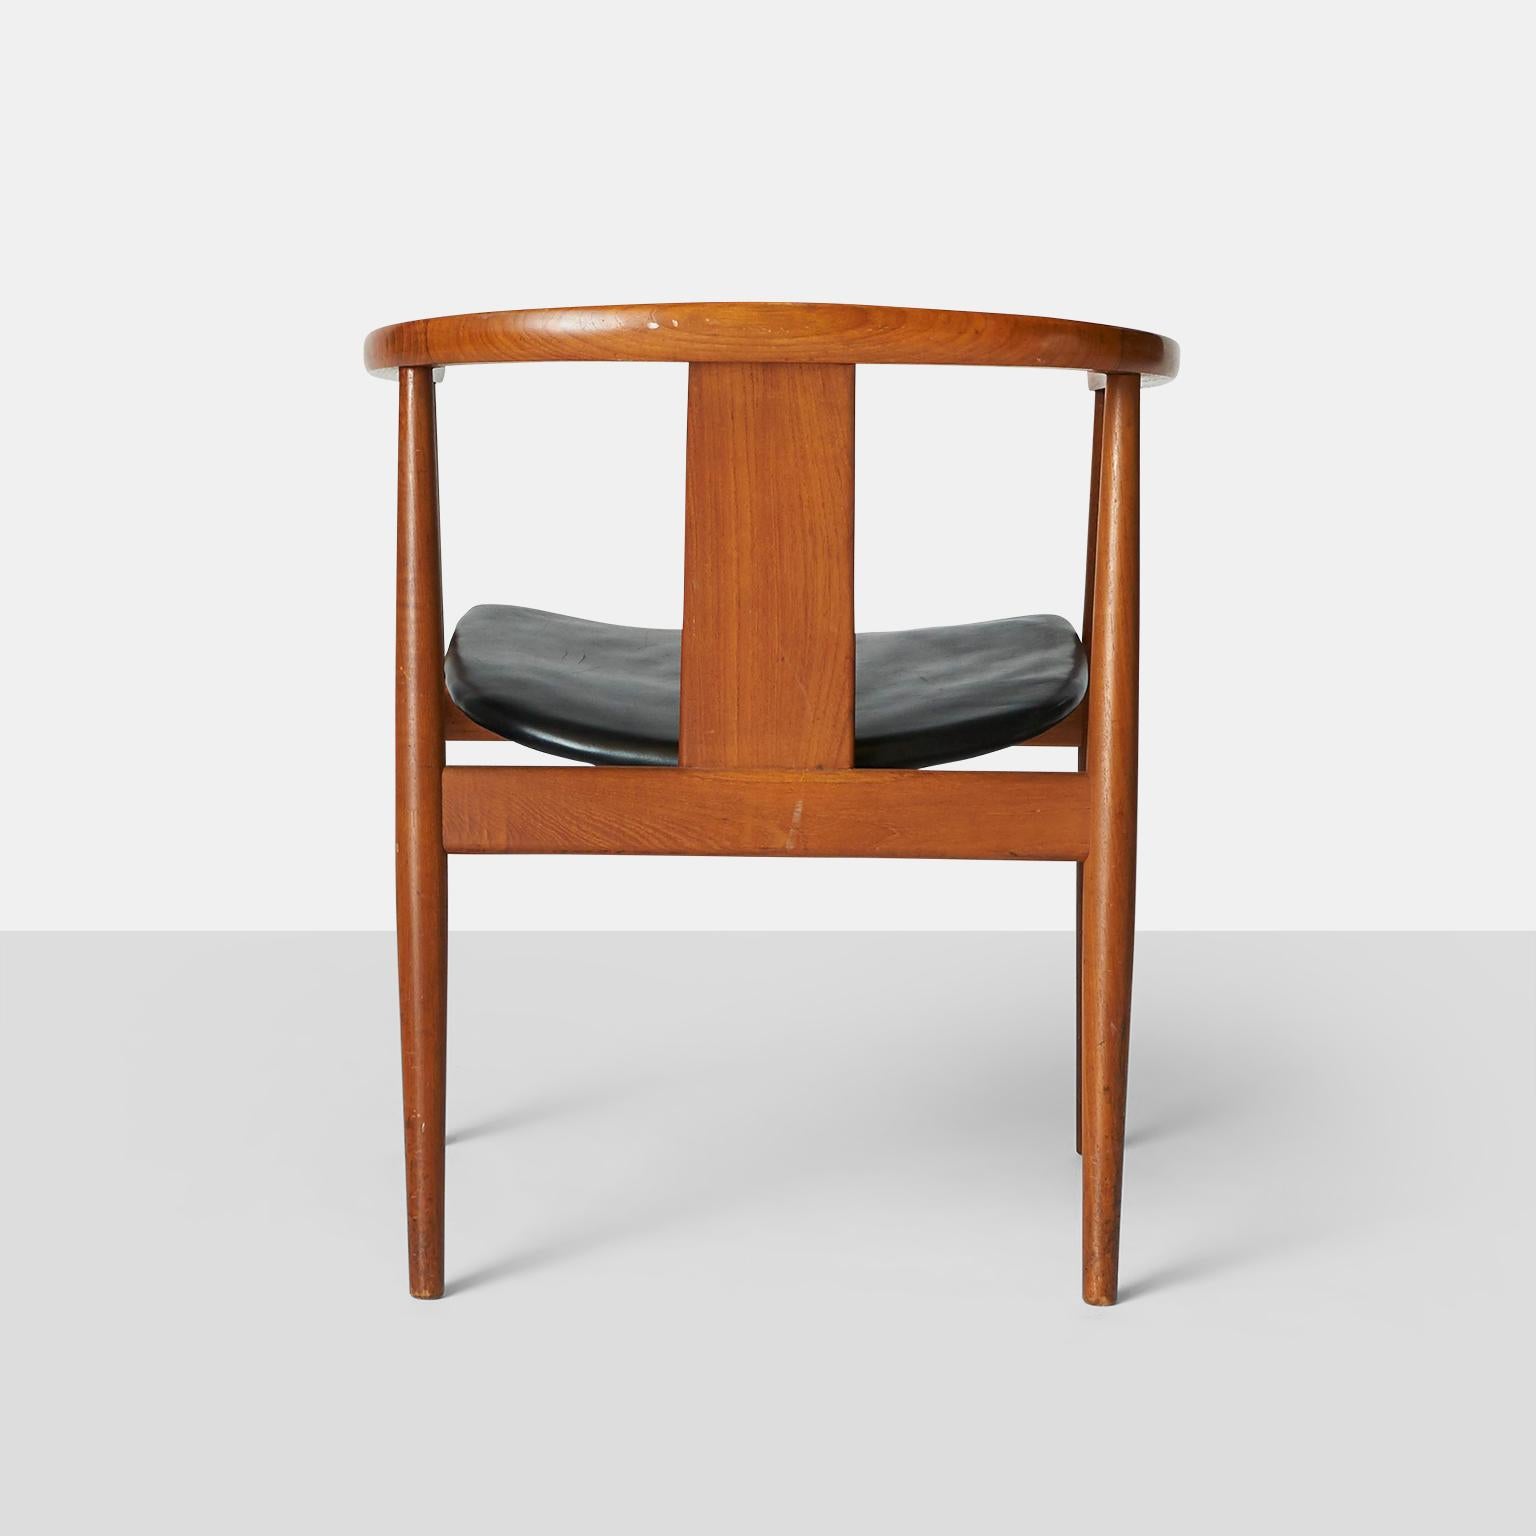 Teak & Leather Chair by Tove and Edvard Kindt-Larsen In Good Condition For Sale In San Francisco, CA